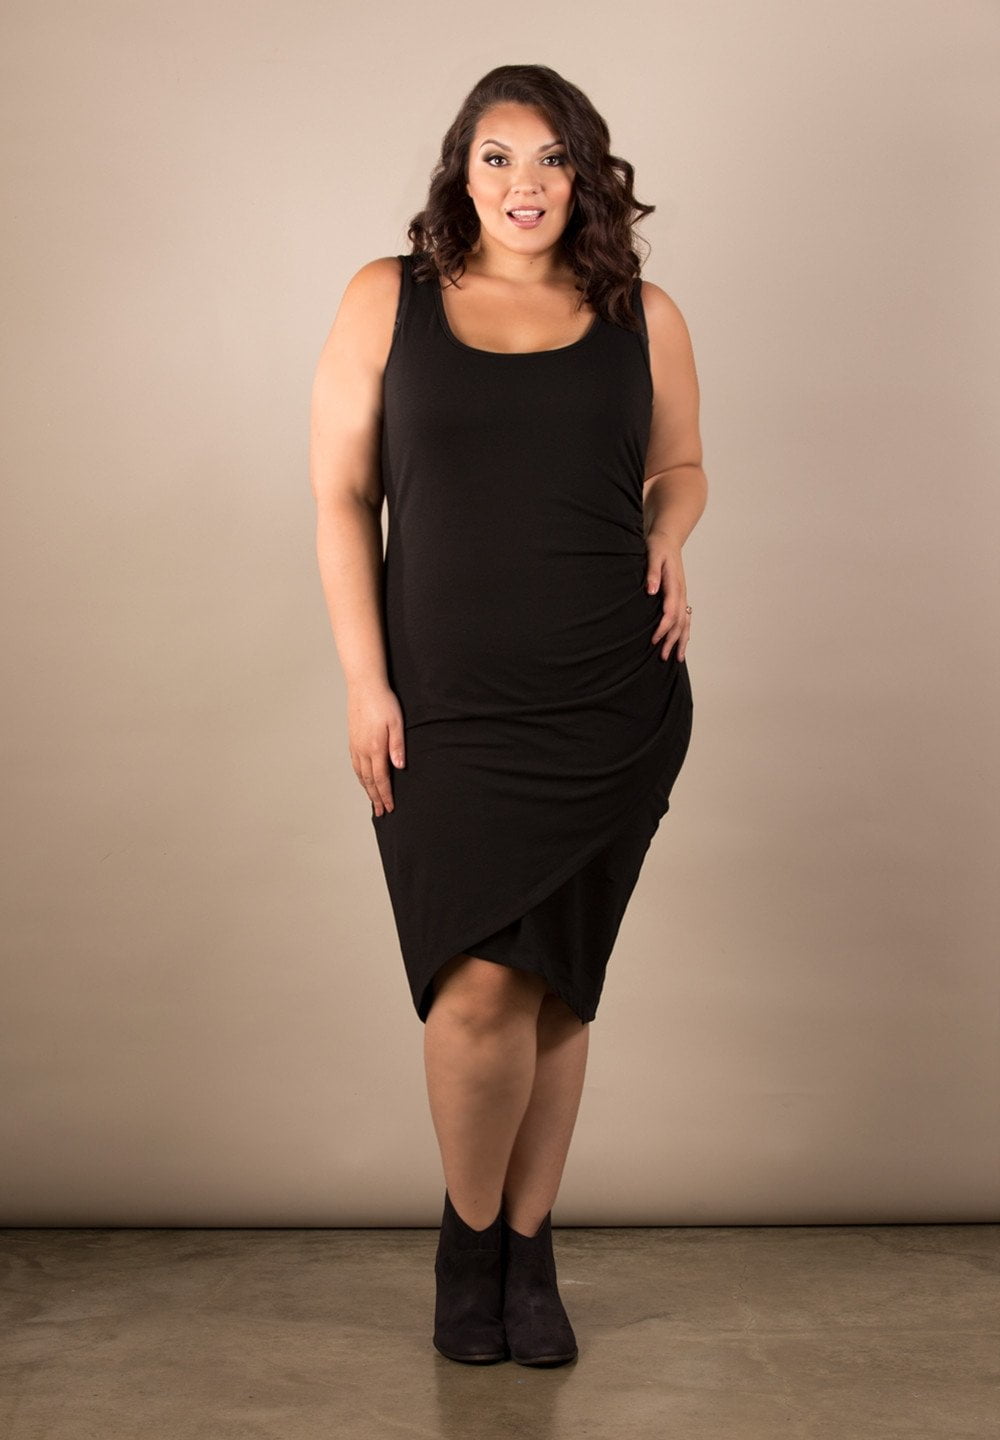 sealed with a kiss black bodycon dress